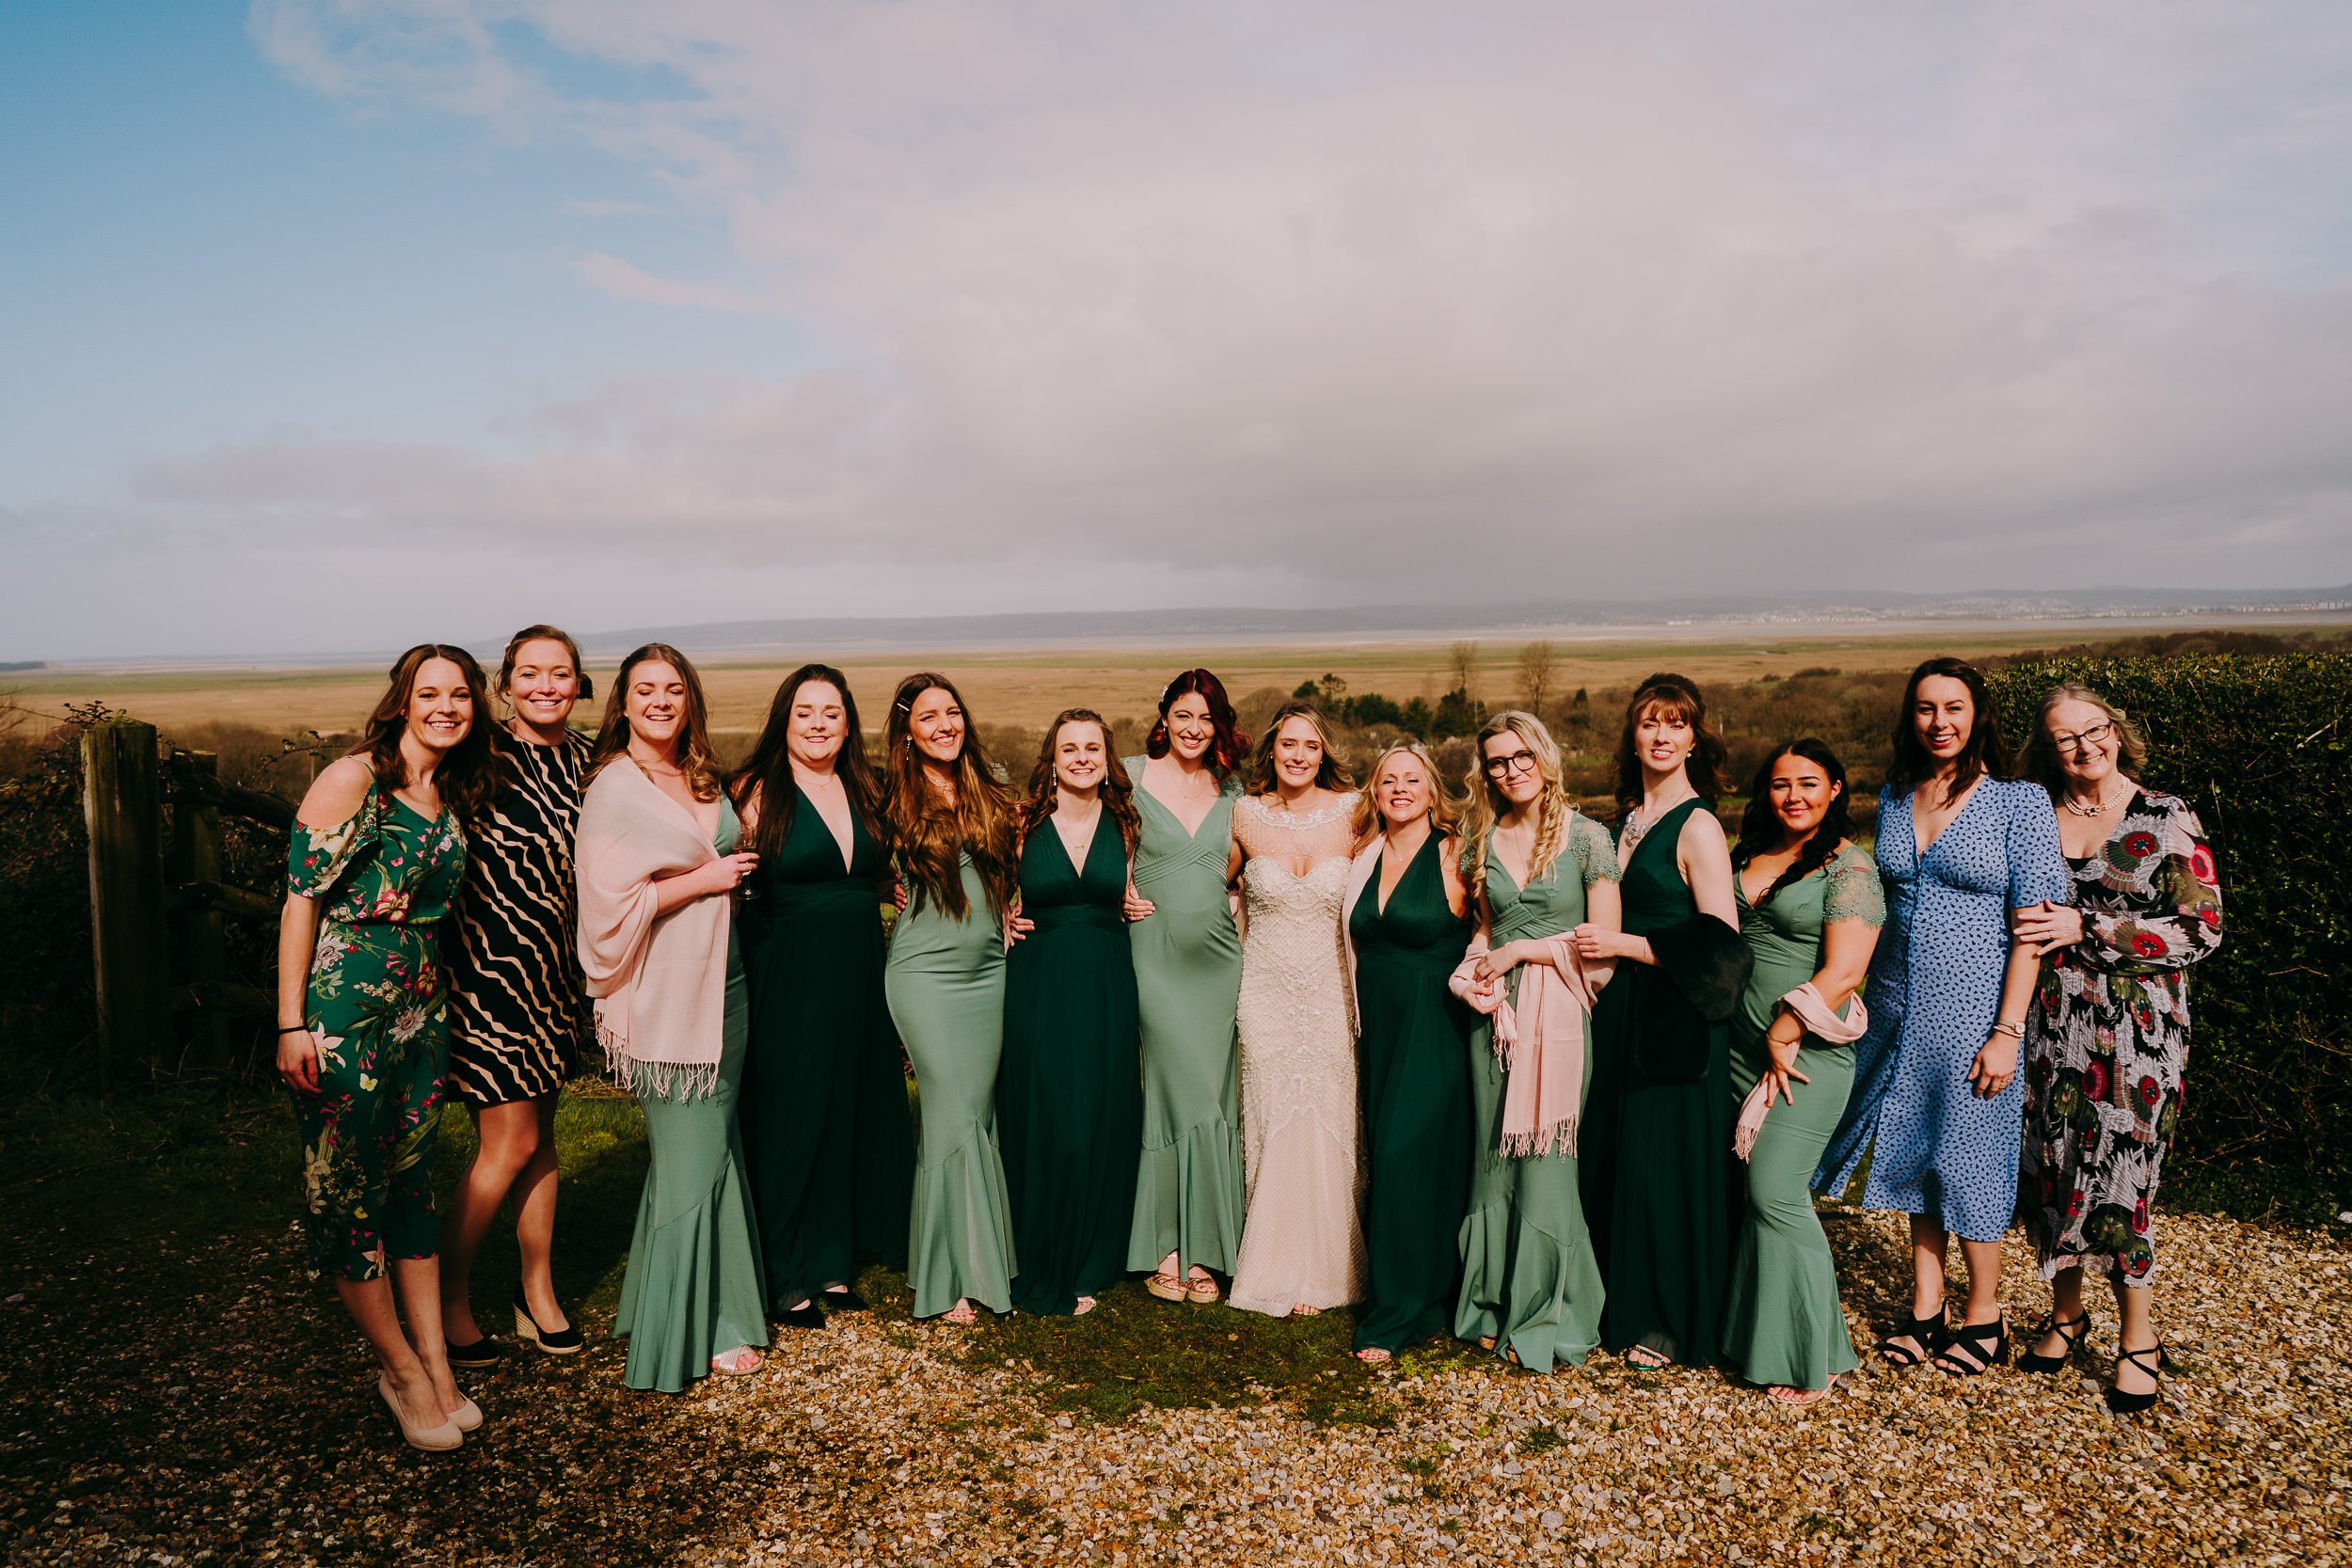  fairyhill swansea natural relaxed luxury wedding photography 